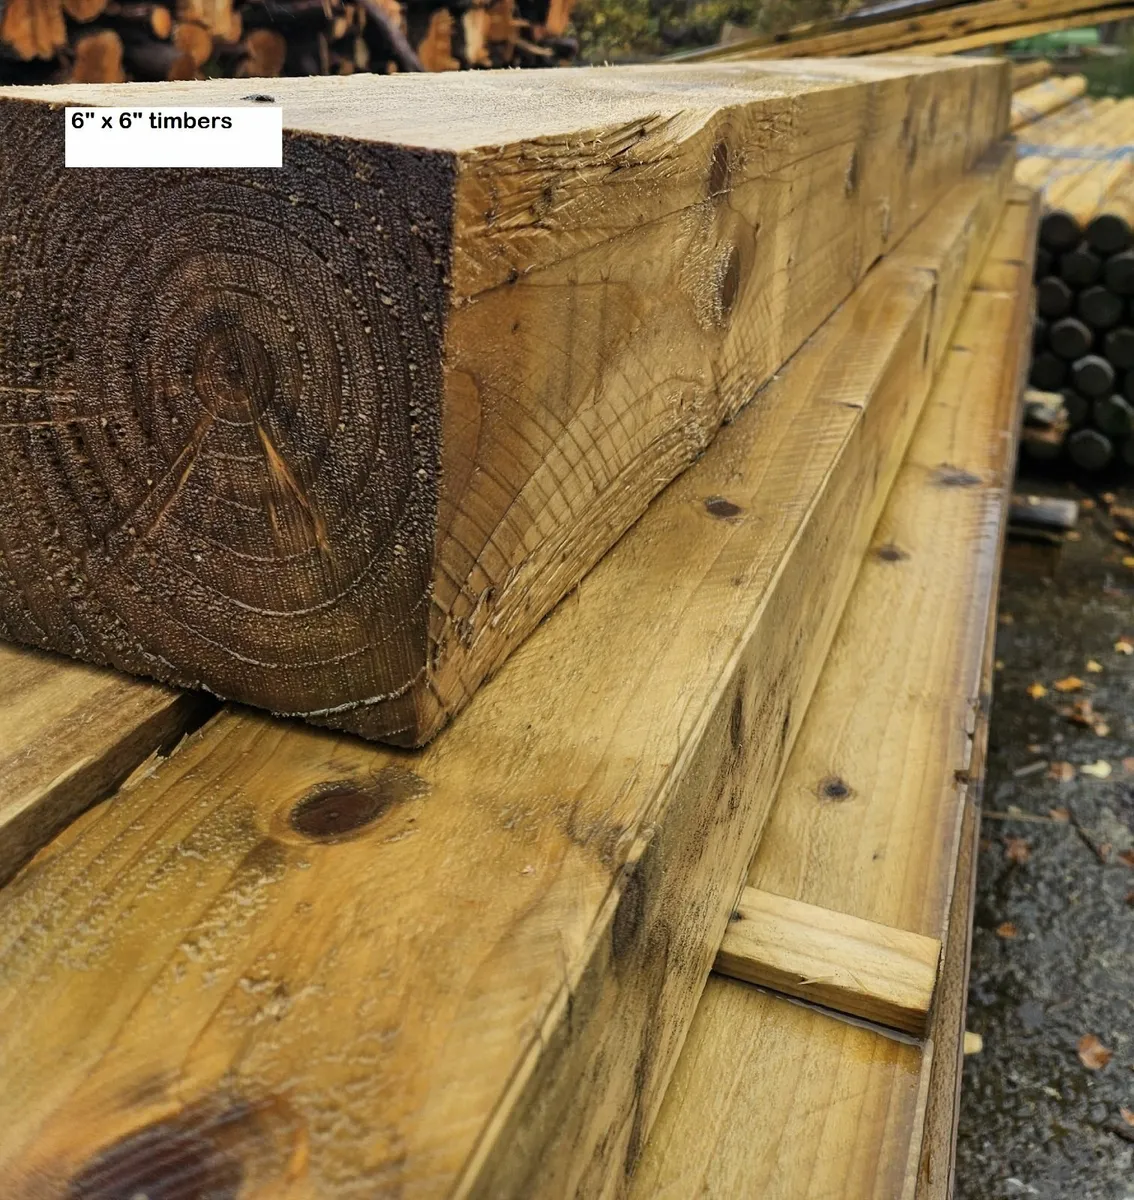 Treated Timber Products